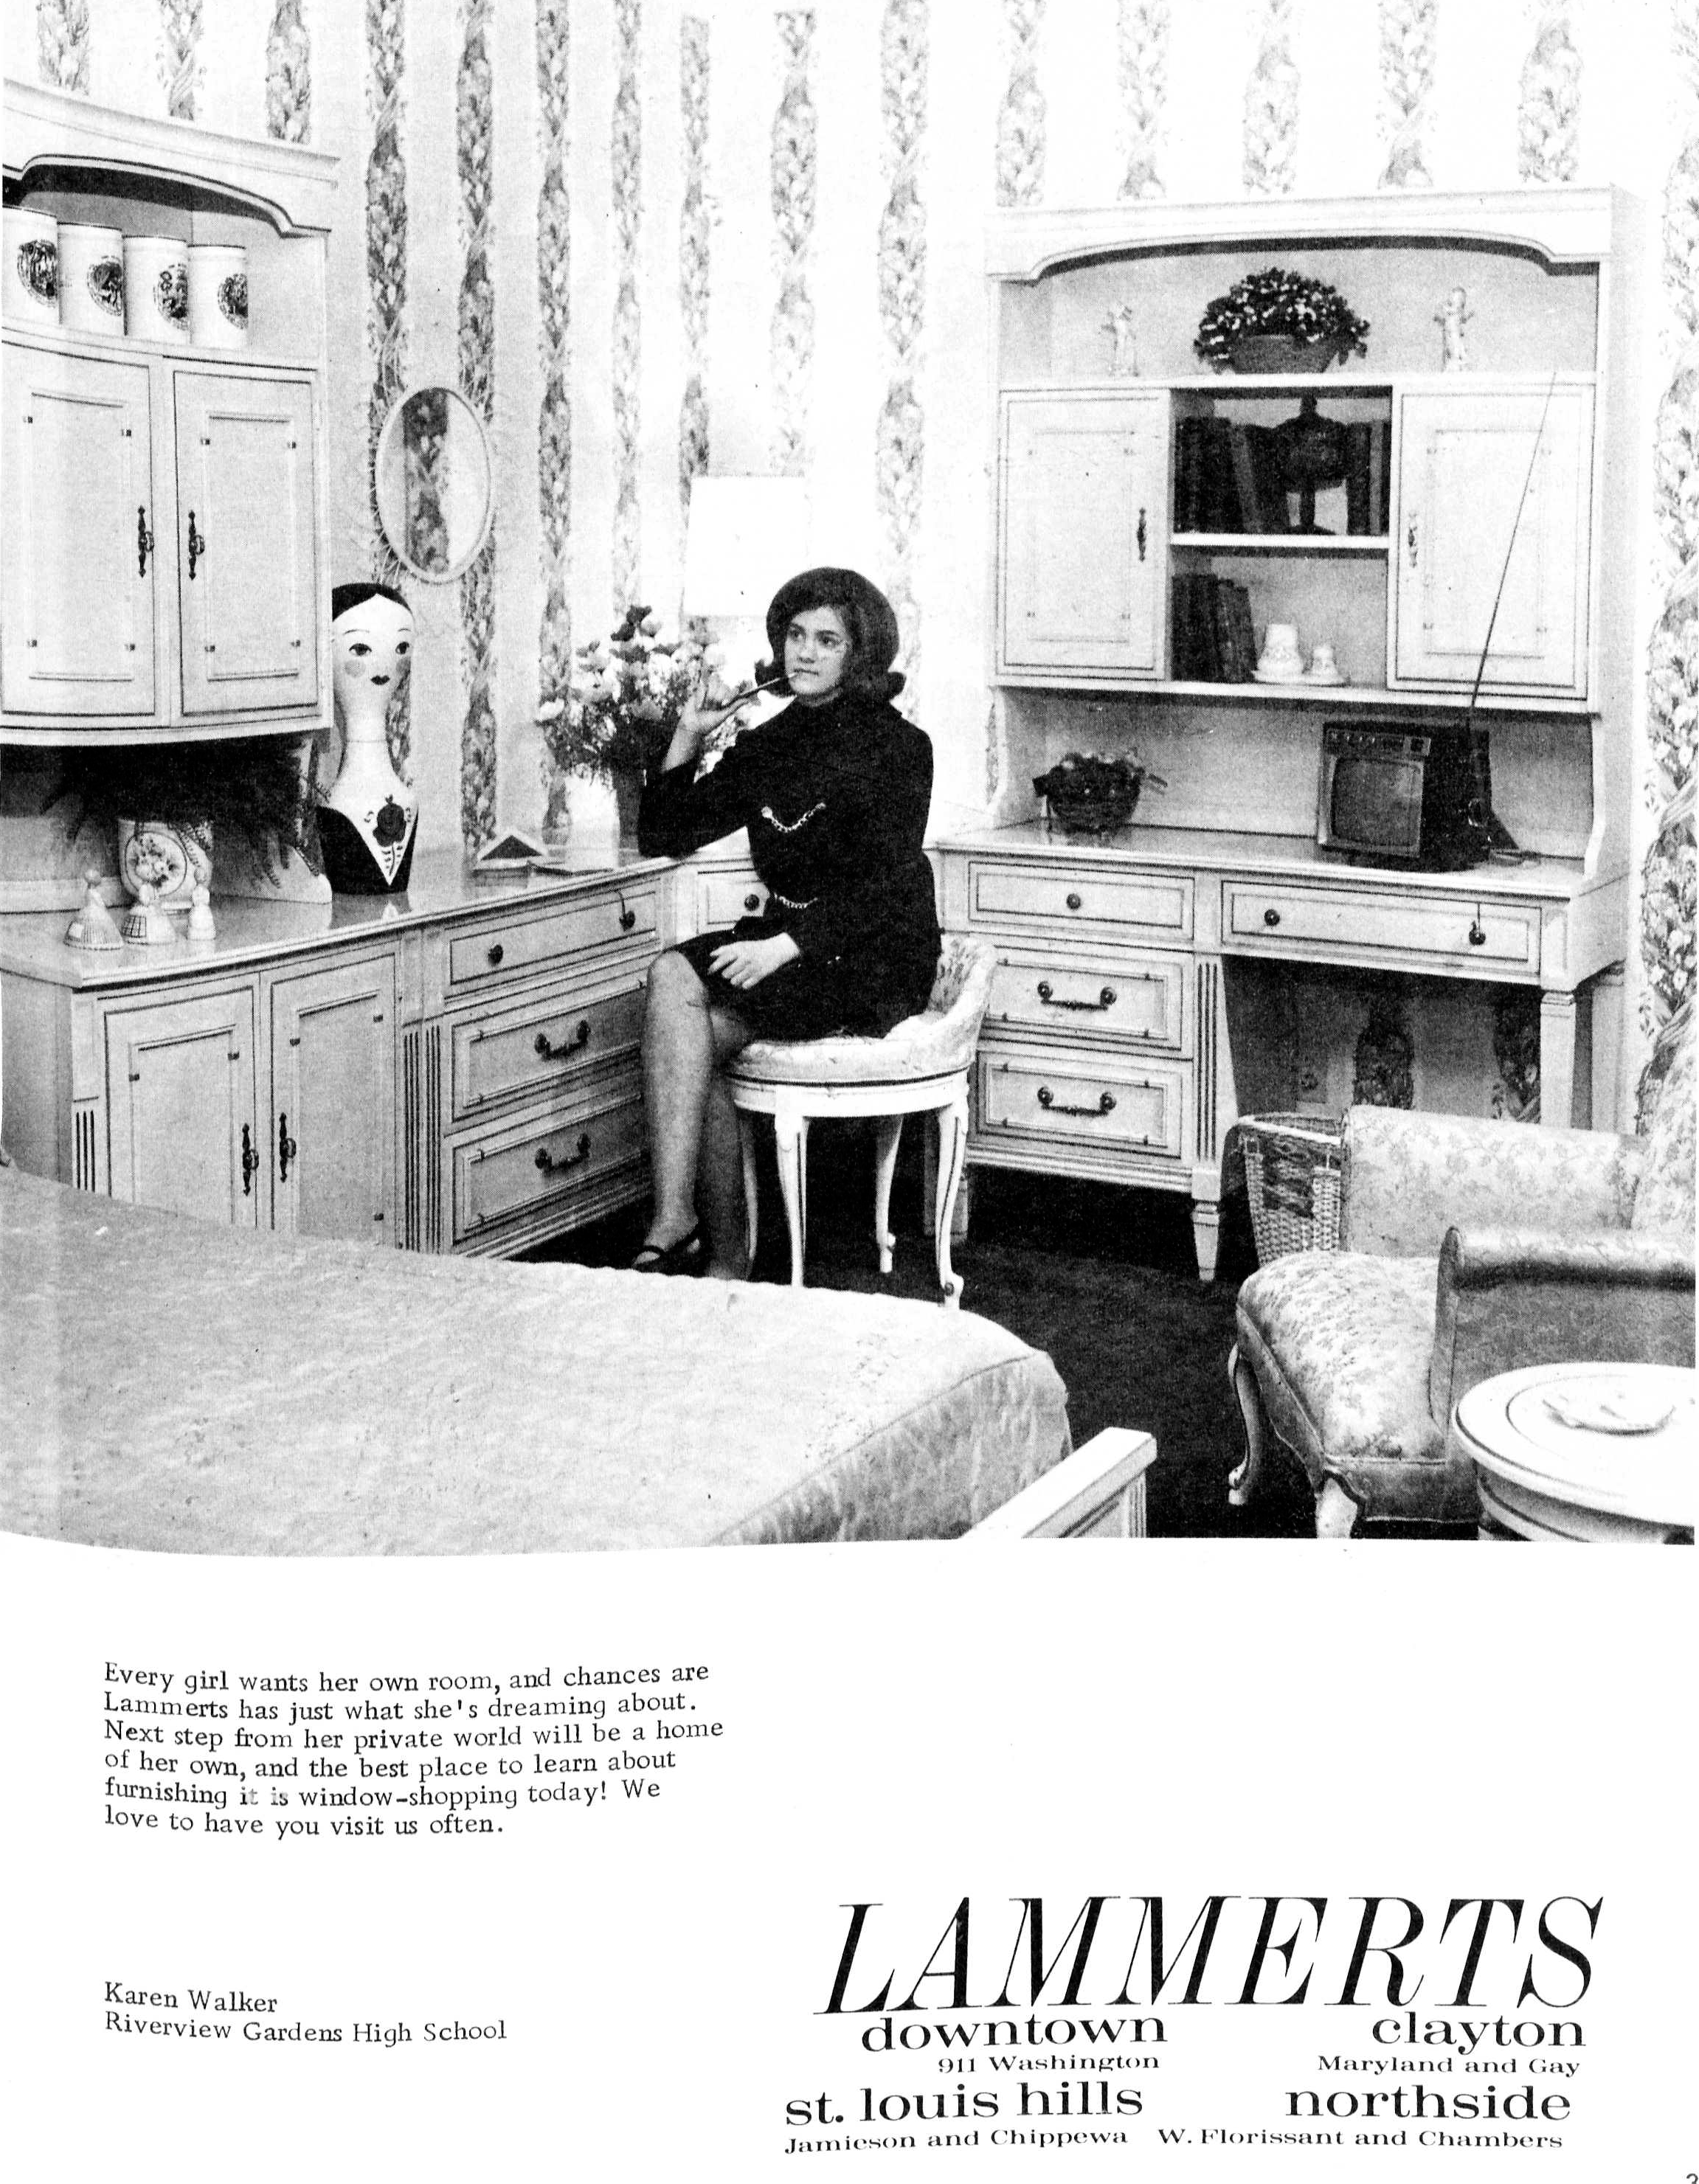 RGHS SENIOR Karen Walker is featured in a Lammerts ad in PROM MAGAZINE MARCH 1968. THE SOFT SELL!